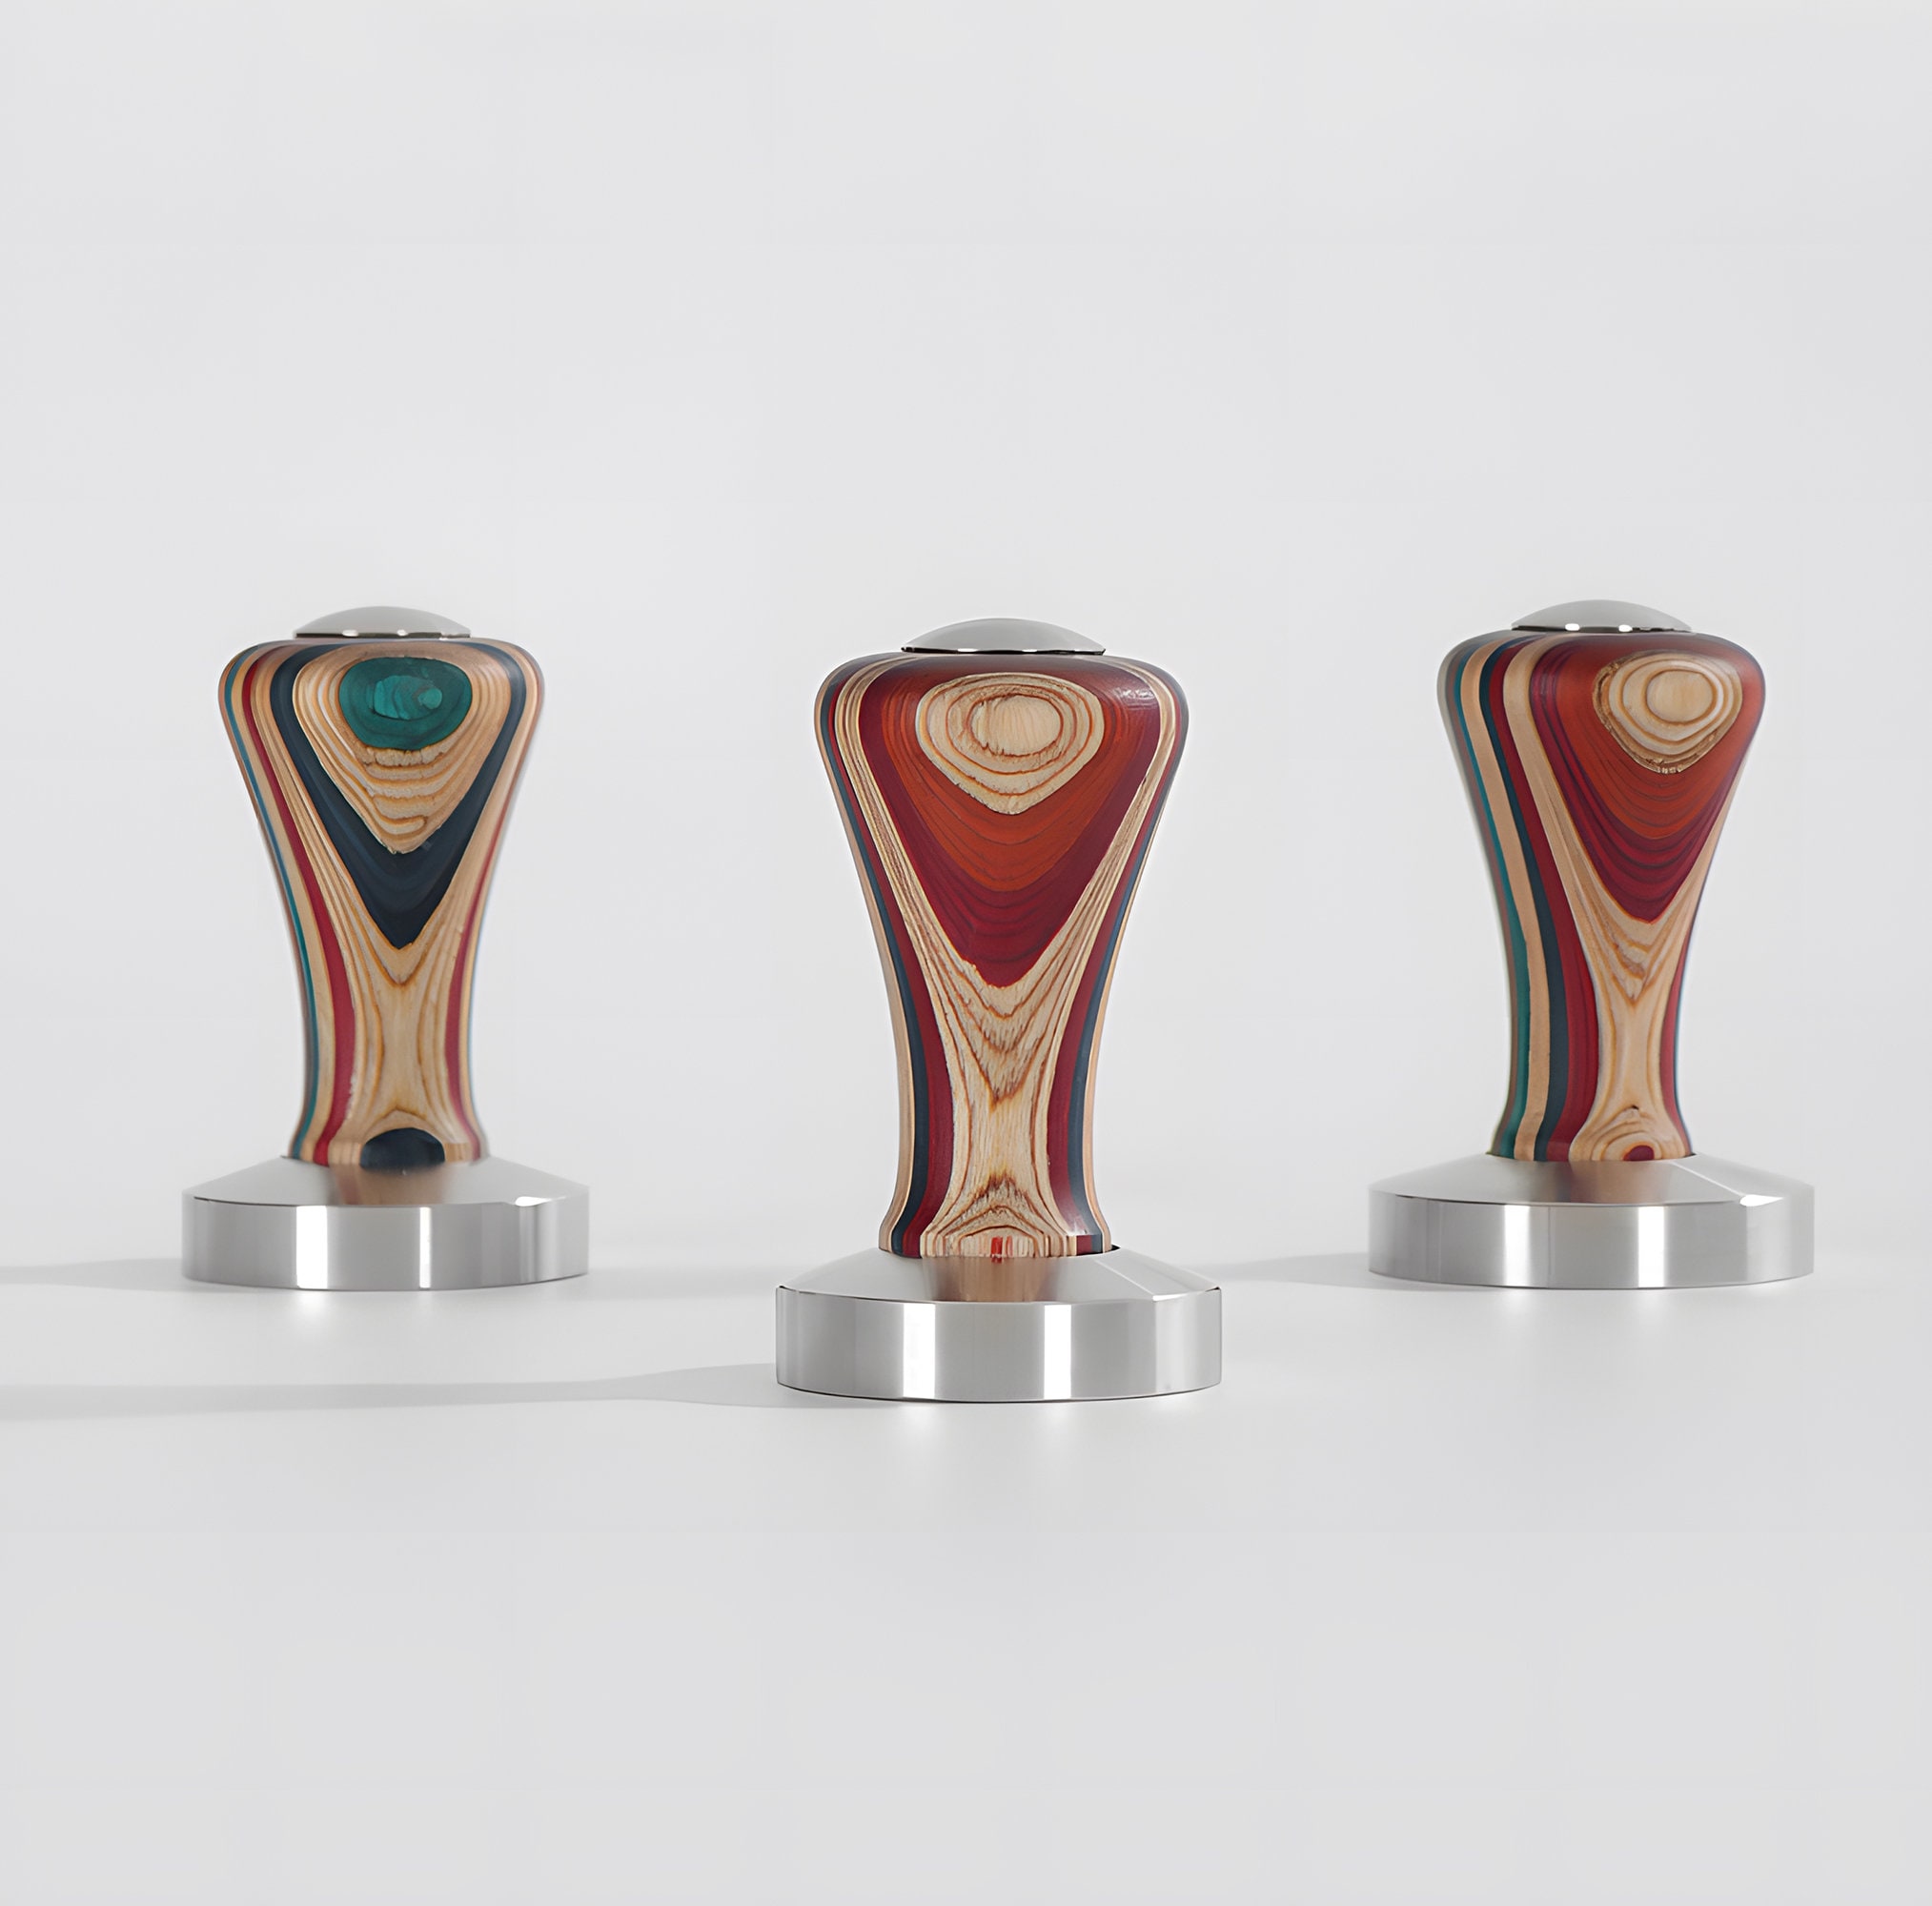 Wooden Espresso Tamper with Colorful Handle